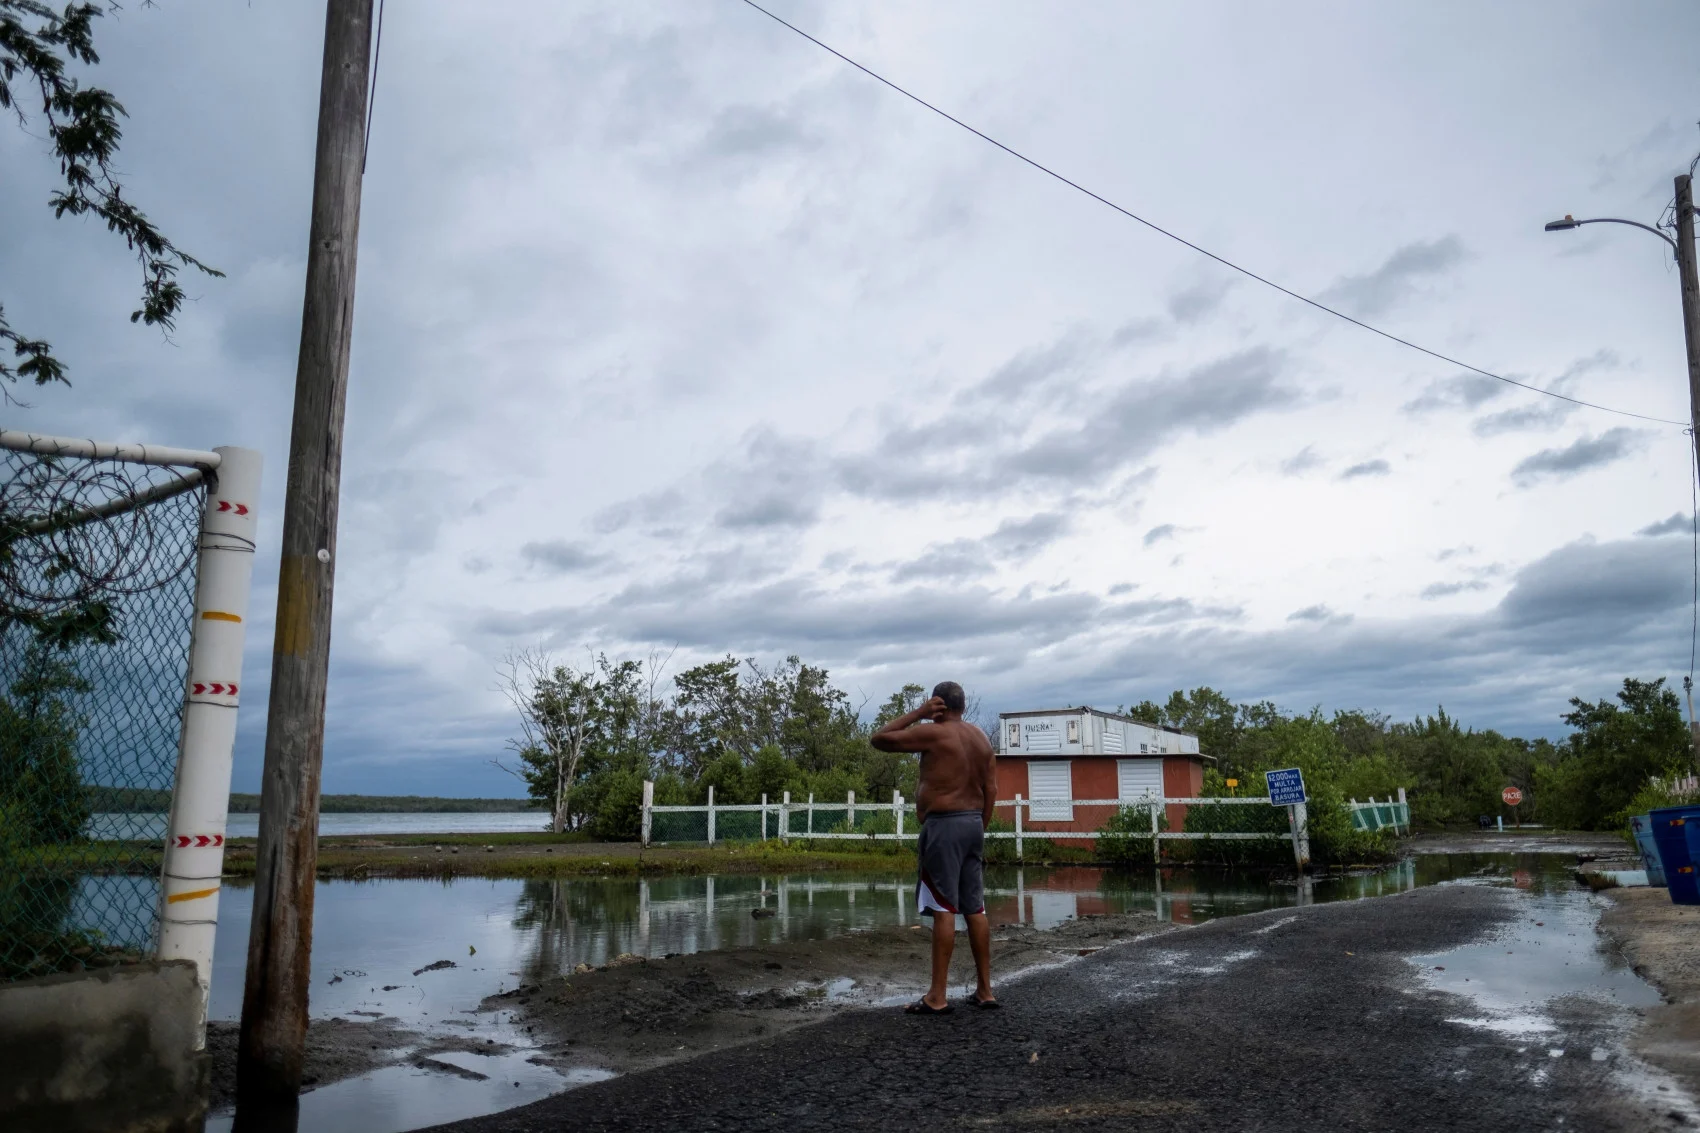 A man surveys his water front neighbourhood as Hurricane Fiona and its heavy rains approaches in Guayanilla, Puerto Rico September 18, 2022. (REUTERS/Ricardo Arduengo)